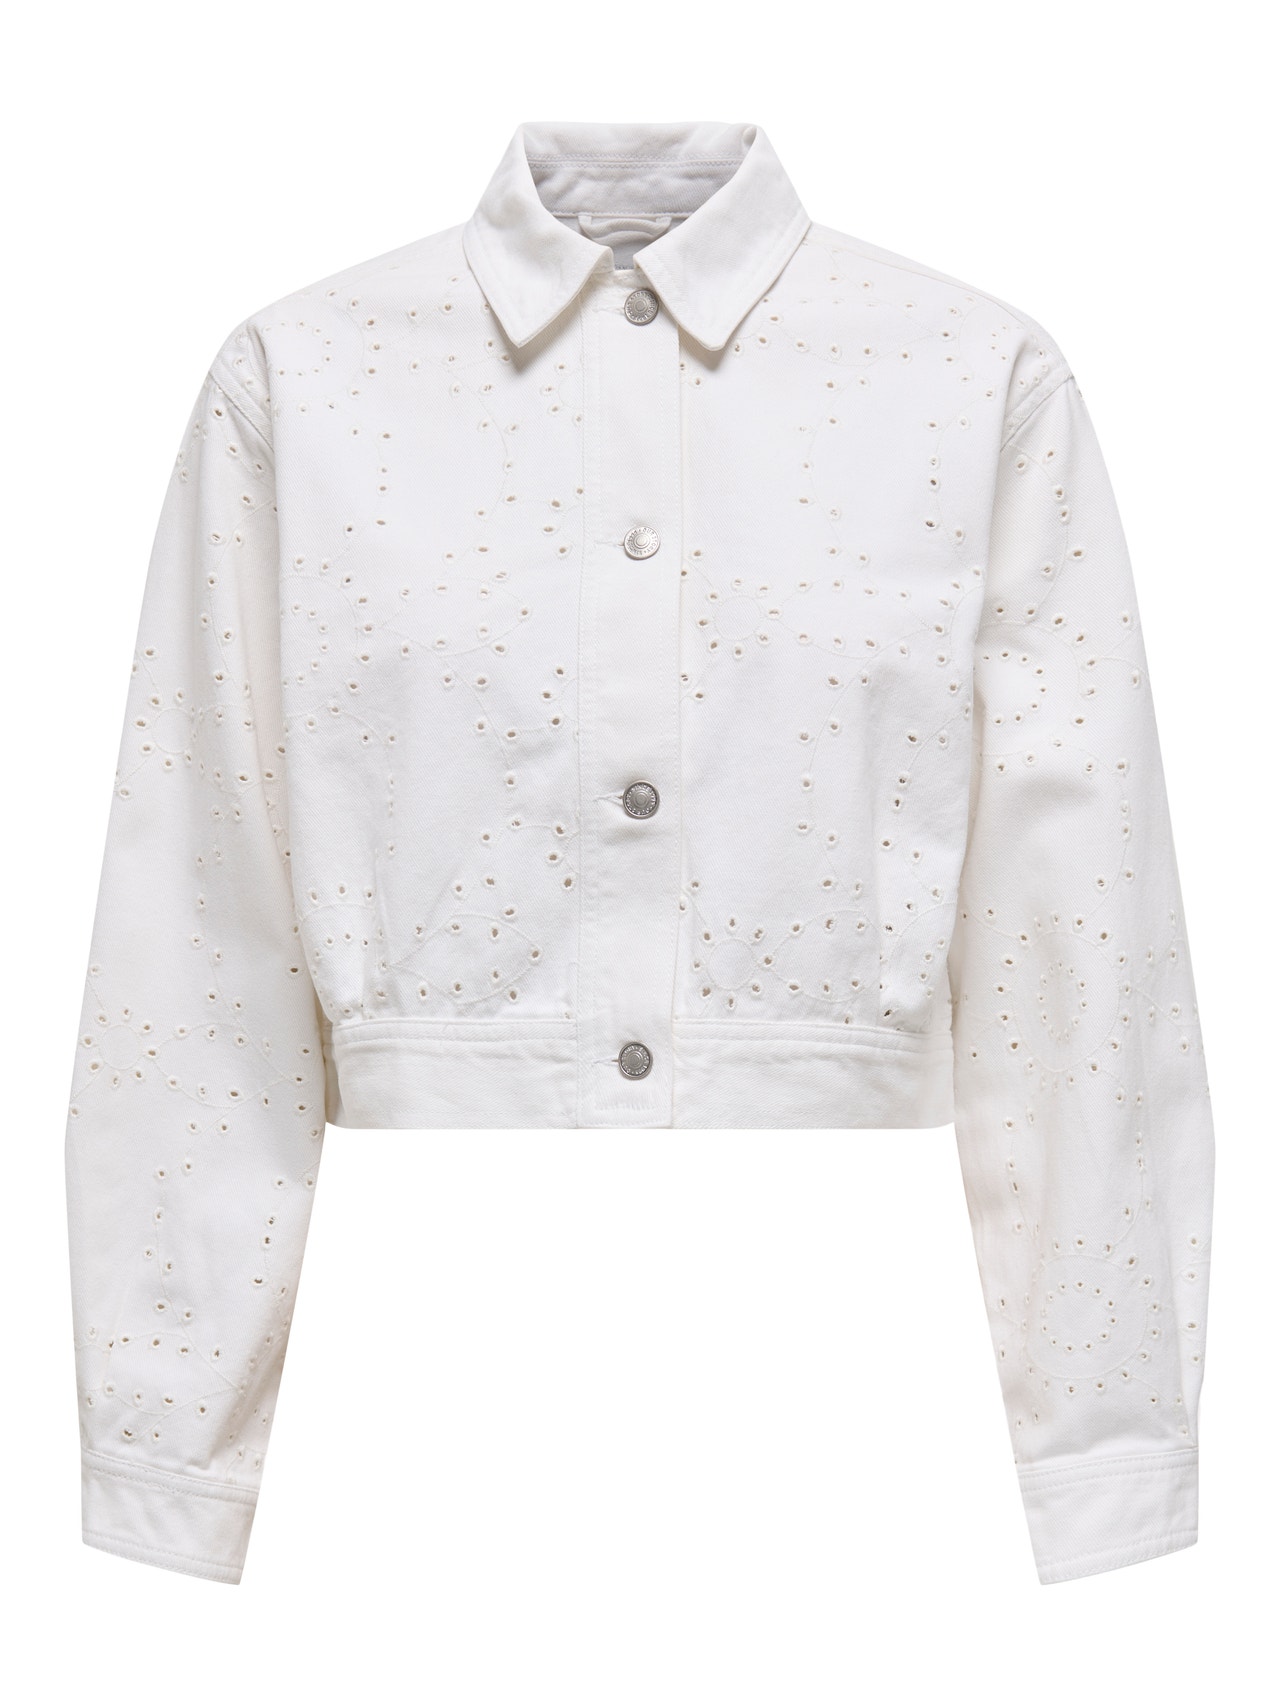 ONLY Cropped embroidered jacket -Bright White - 15312709